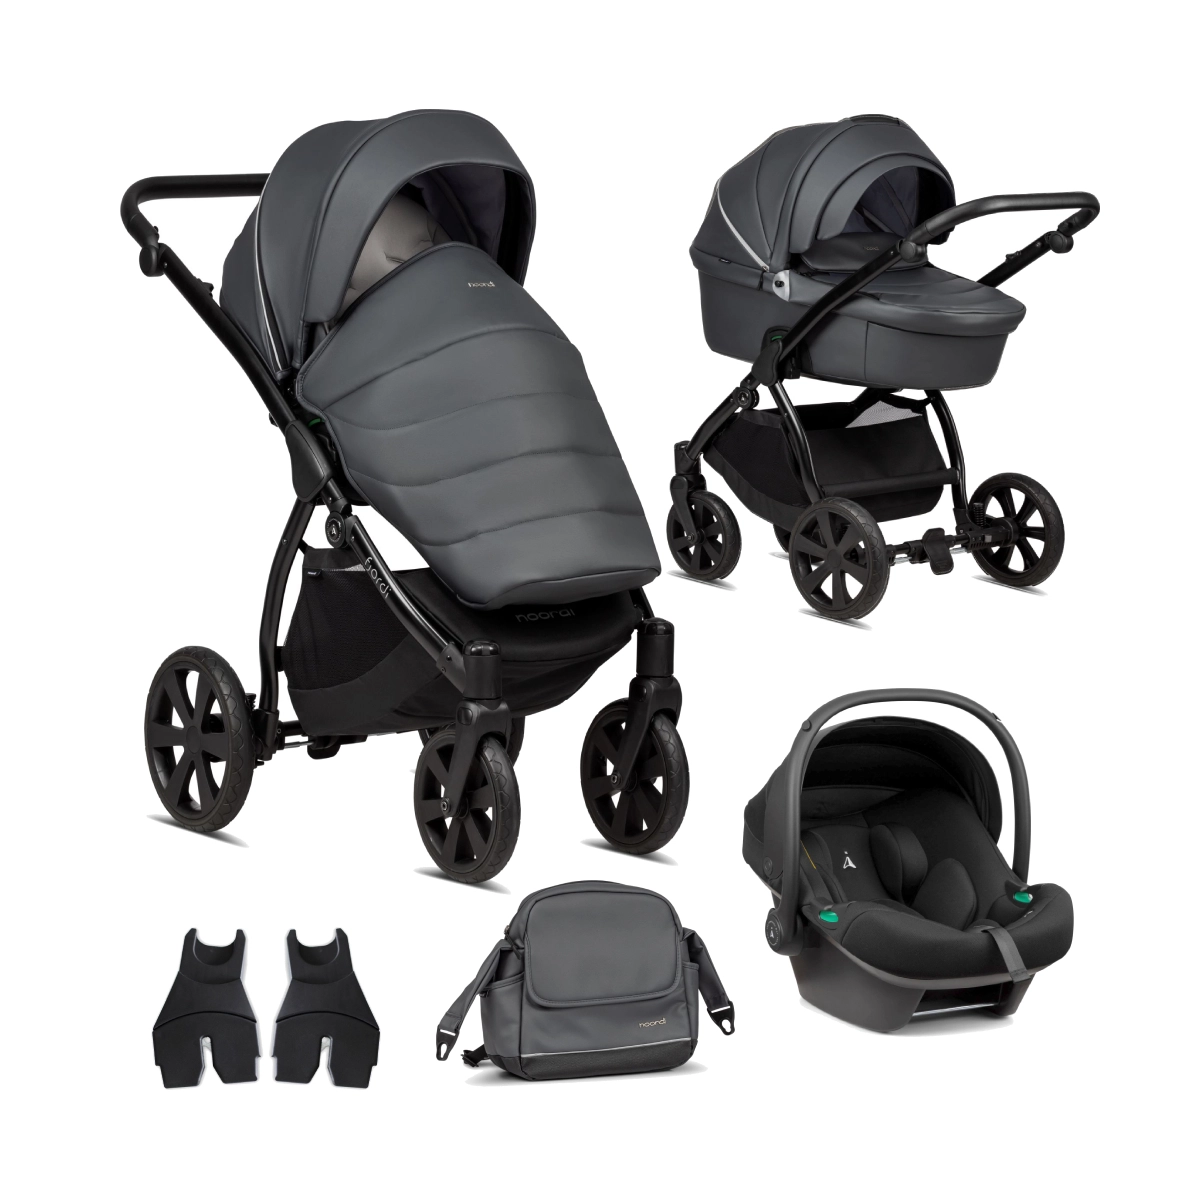 Noordi Fjordi Leather 3in1 Travel System with Terra i-Size Car Seat